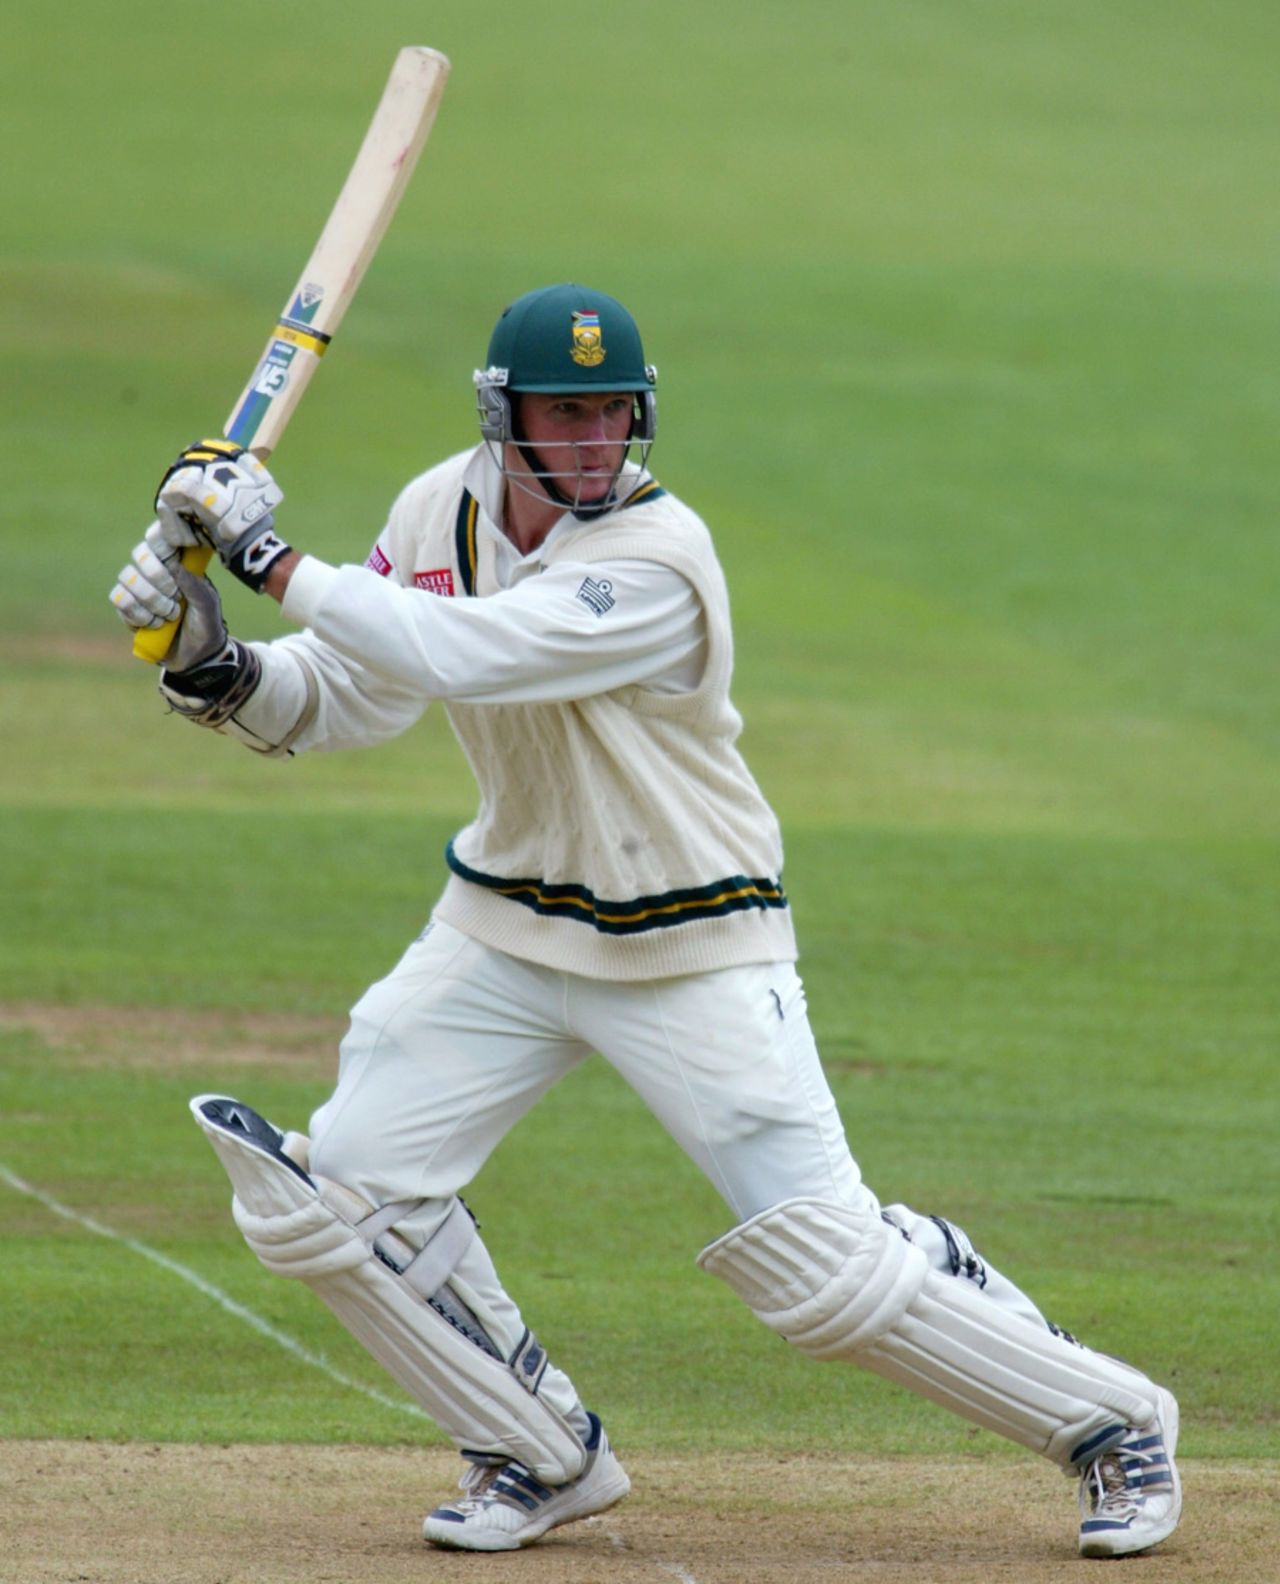 Graeme Smith on his way to a double-hundred, England v South Africa, 2nd Test, Lord's, 2nd day, August 1, 2003